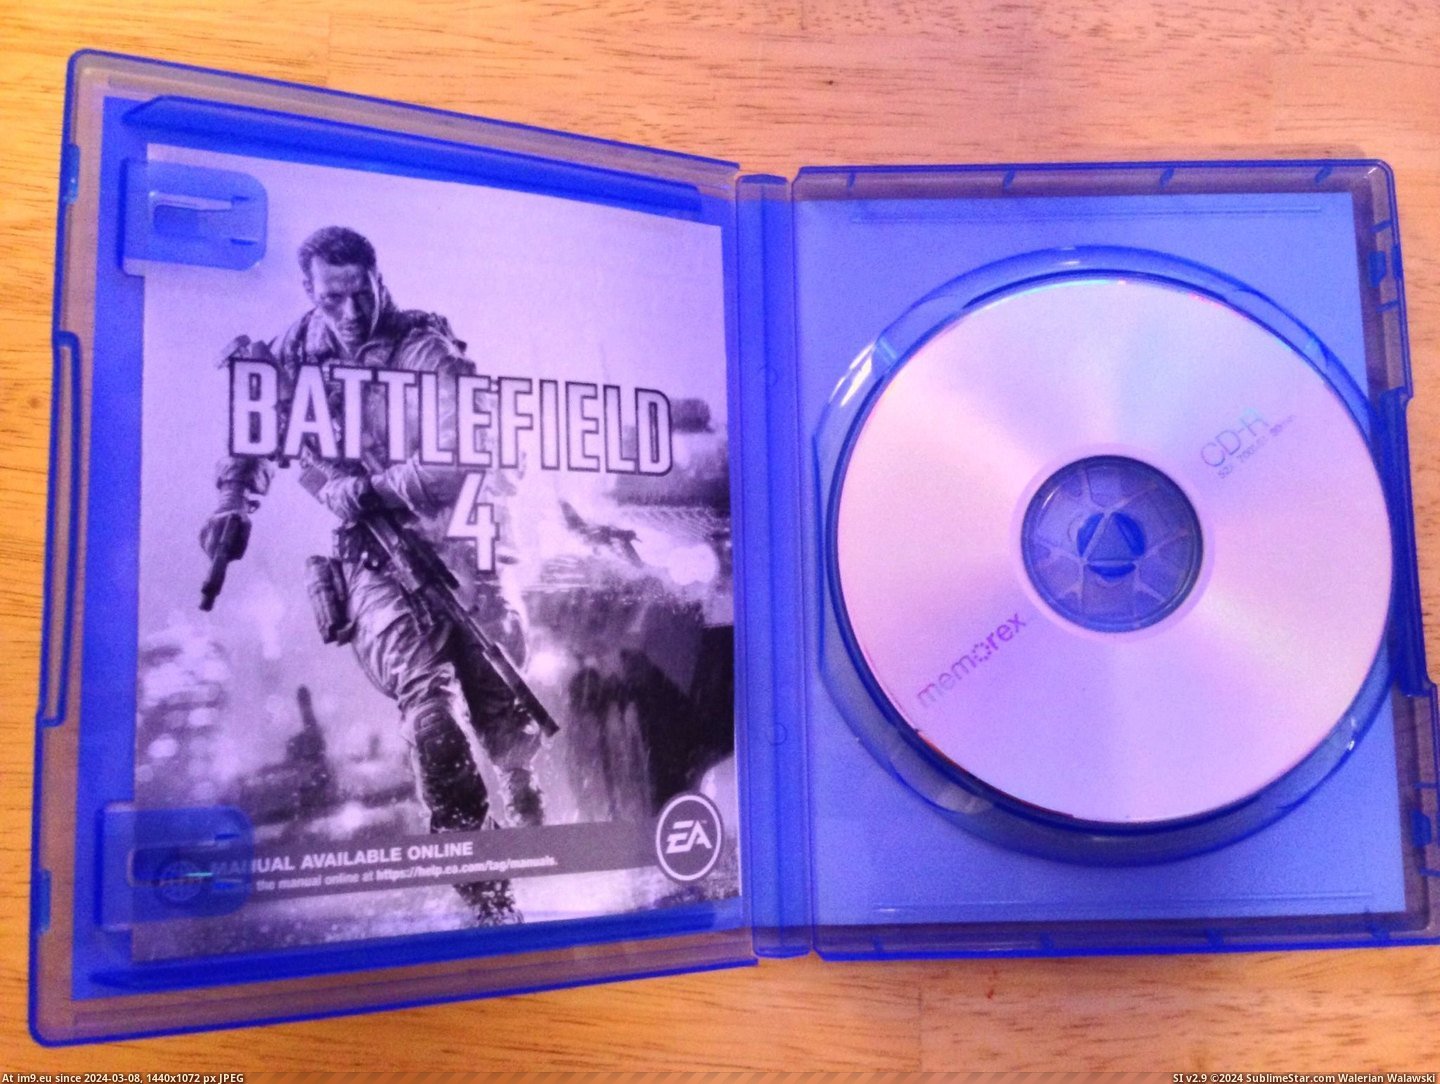 #Gaming #For #Was #Walmart #Ps4 #Battlefield #Fuck #How #Bought [Gaming] Bought Battlefield 4 for PS4 from Walmart, this was inside. How the fuck is this possible? Pic. (Изображение из альбом My r/GAMING favs))